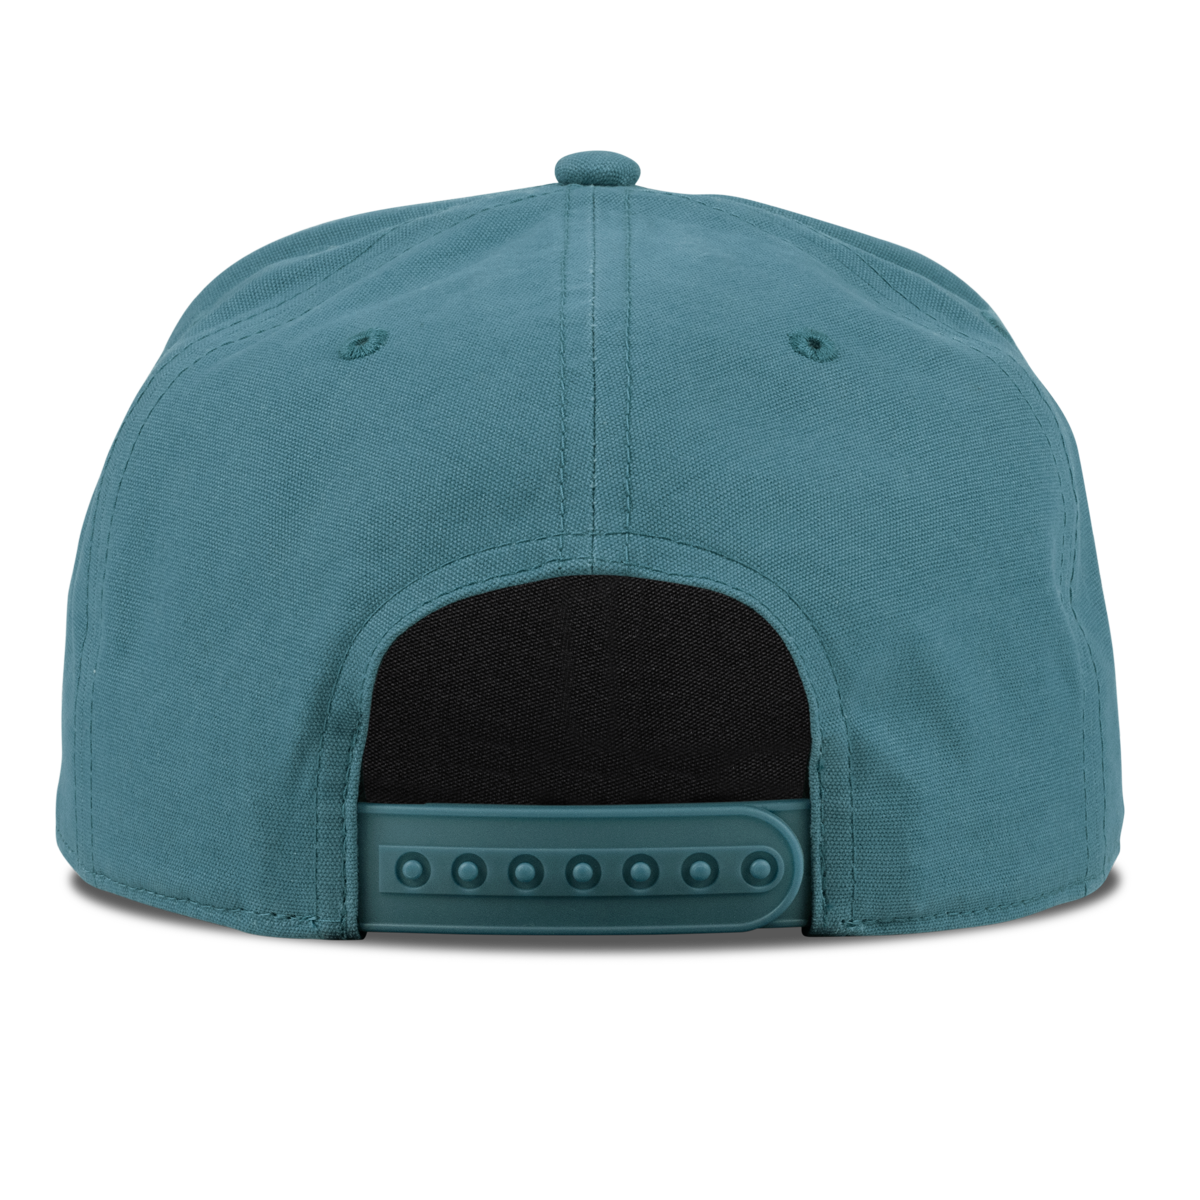 Old Glory Stealth Canvas 5 Panel Rope Marine